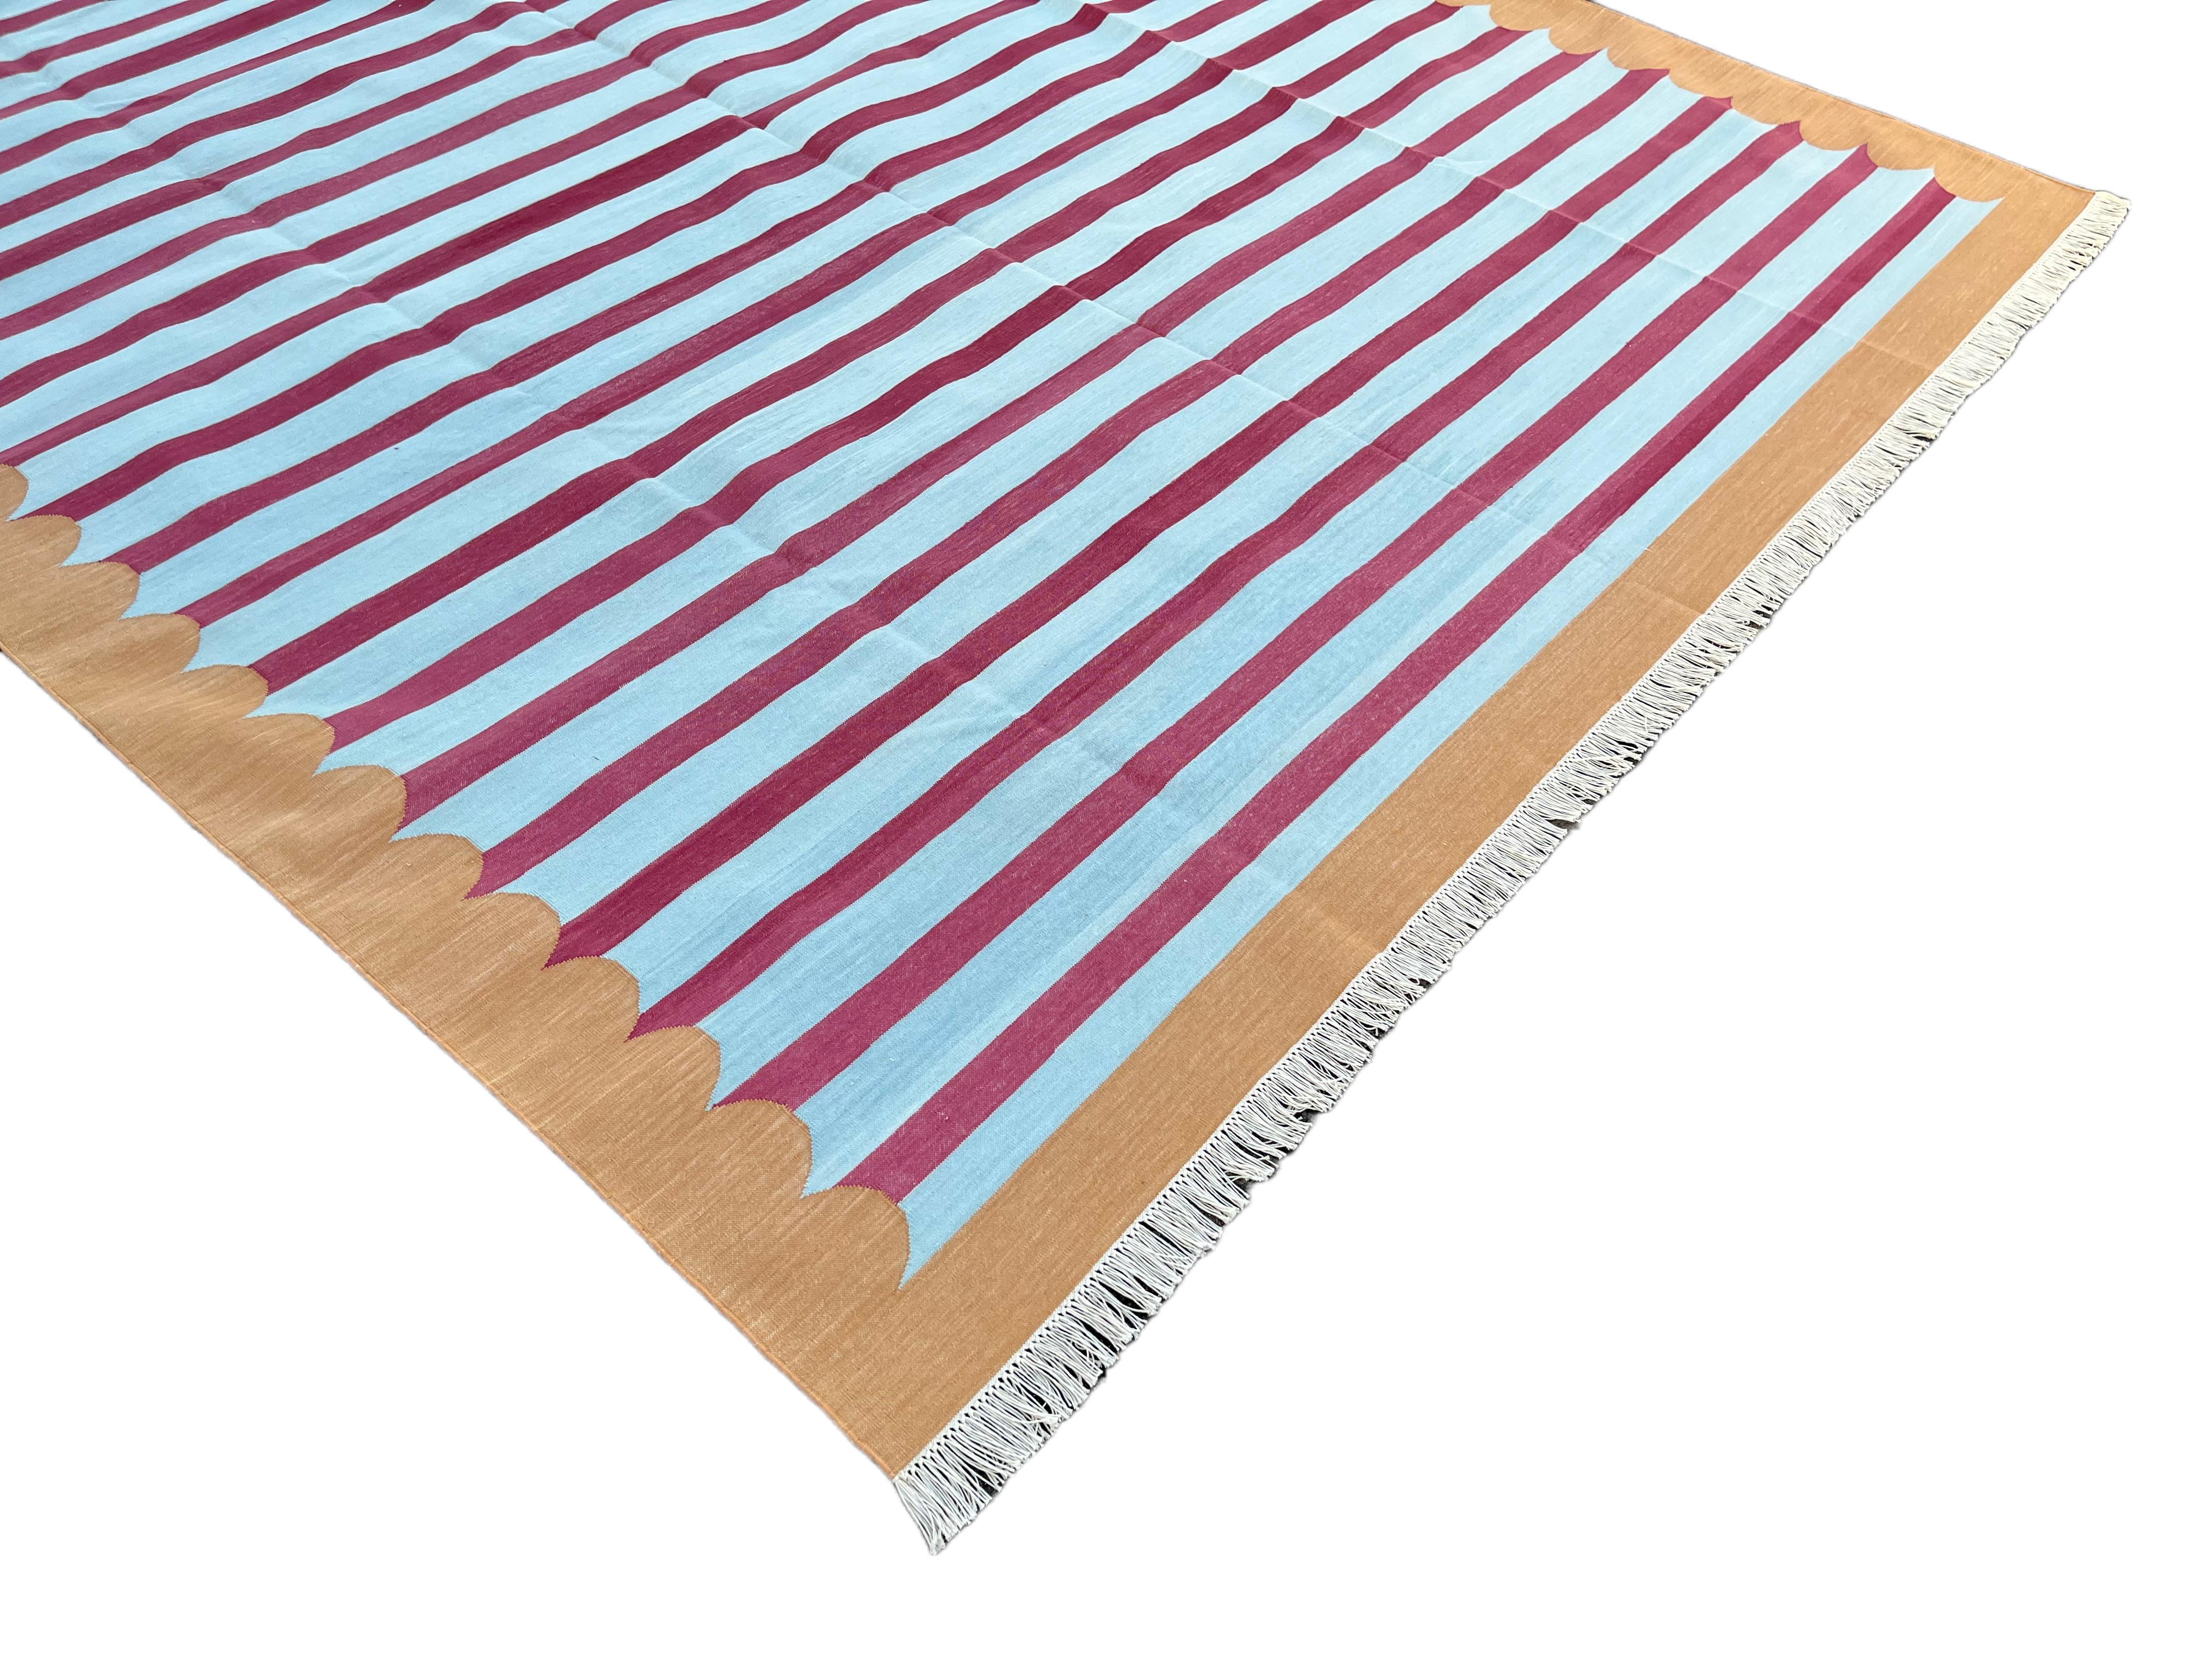 Contemporary Handmade Cotton Area Flat Weave Rug, 8x10 Blue, Tan, Pink Striped Indian Dhurrie For Sale